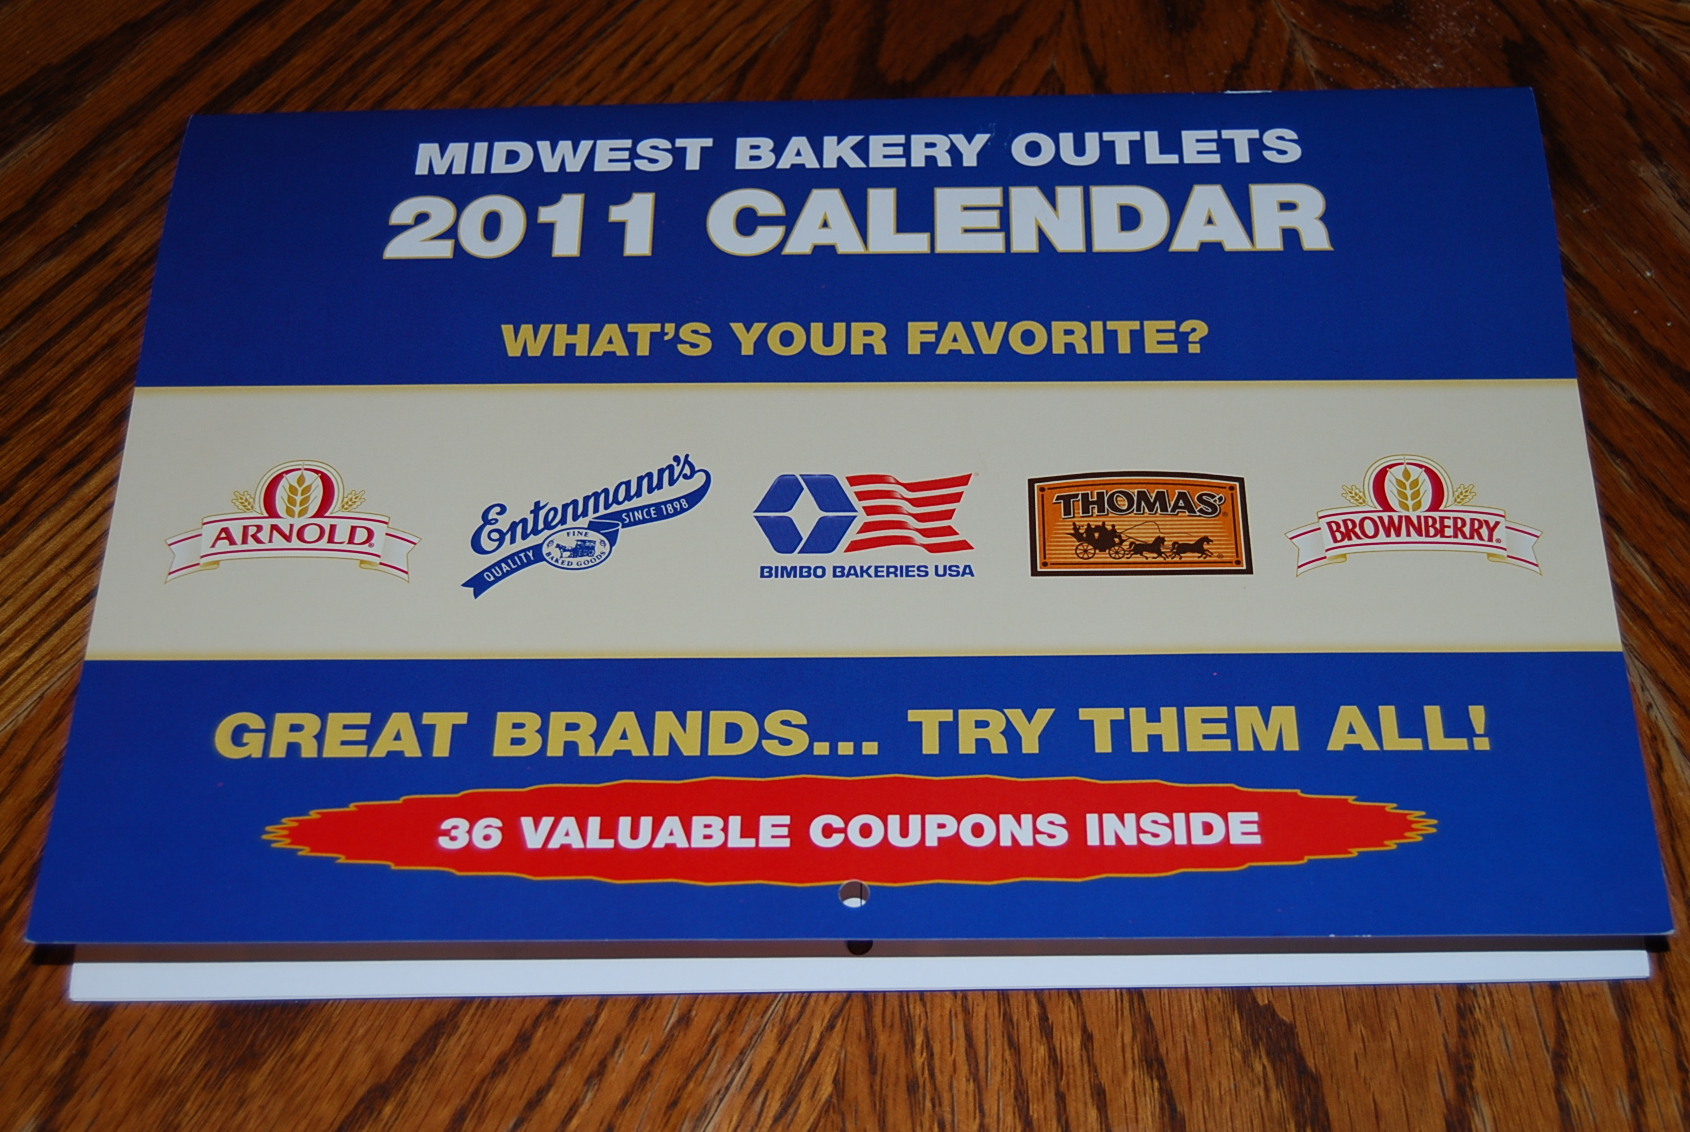 Entenmann's Store Discounts + Calendar with Coupons